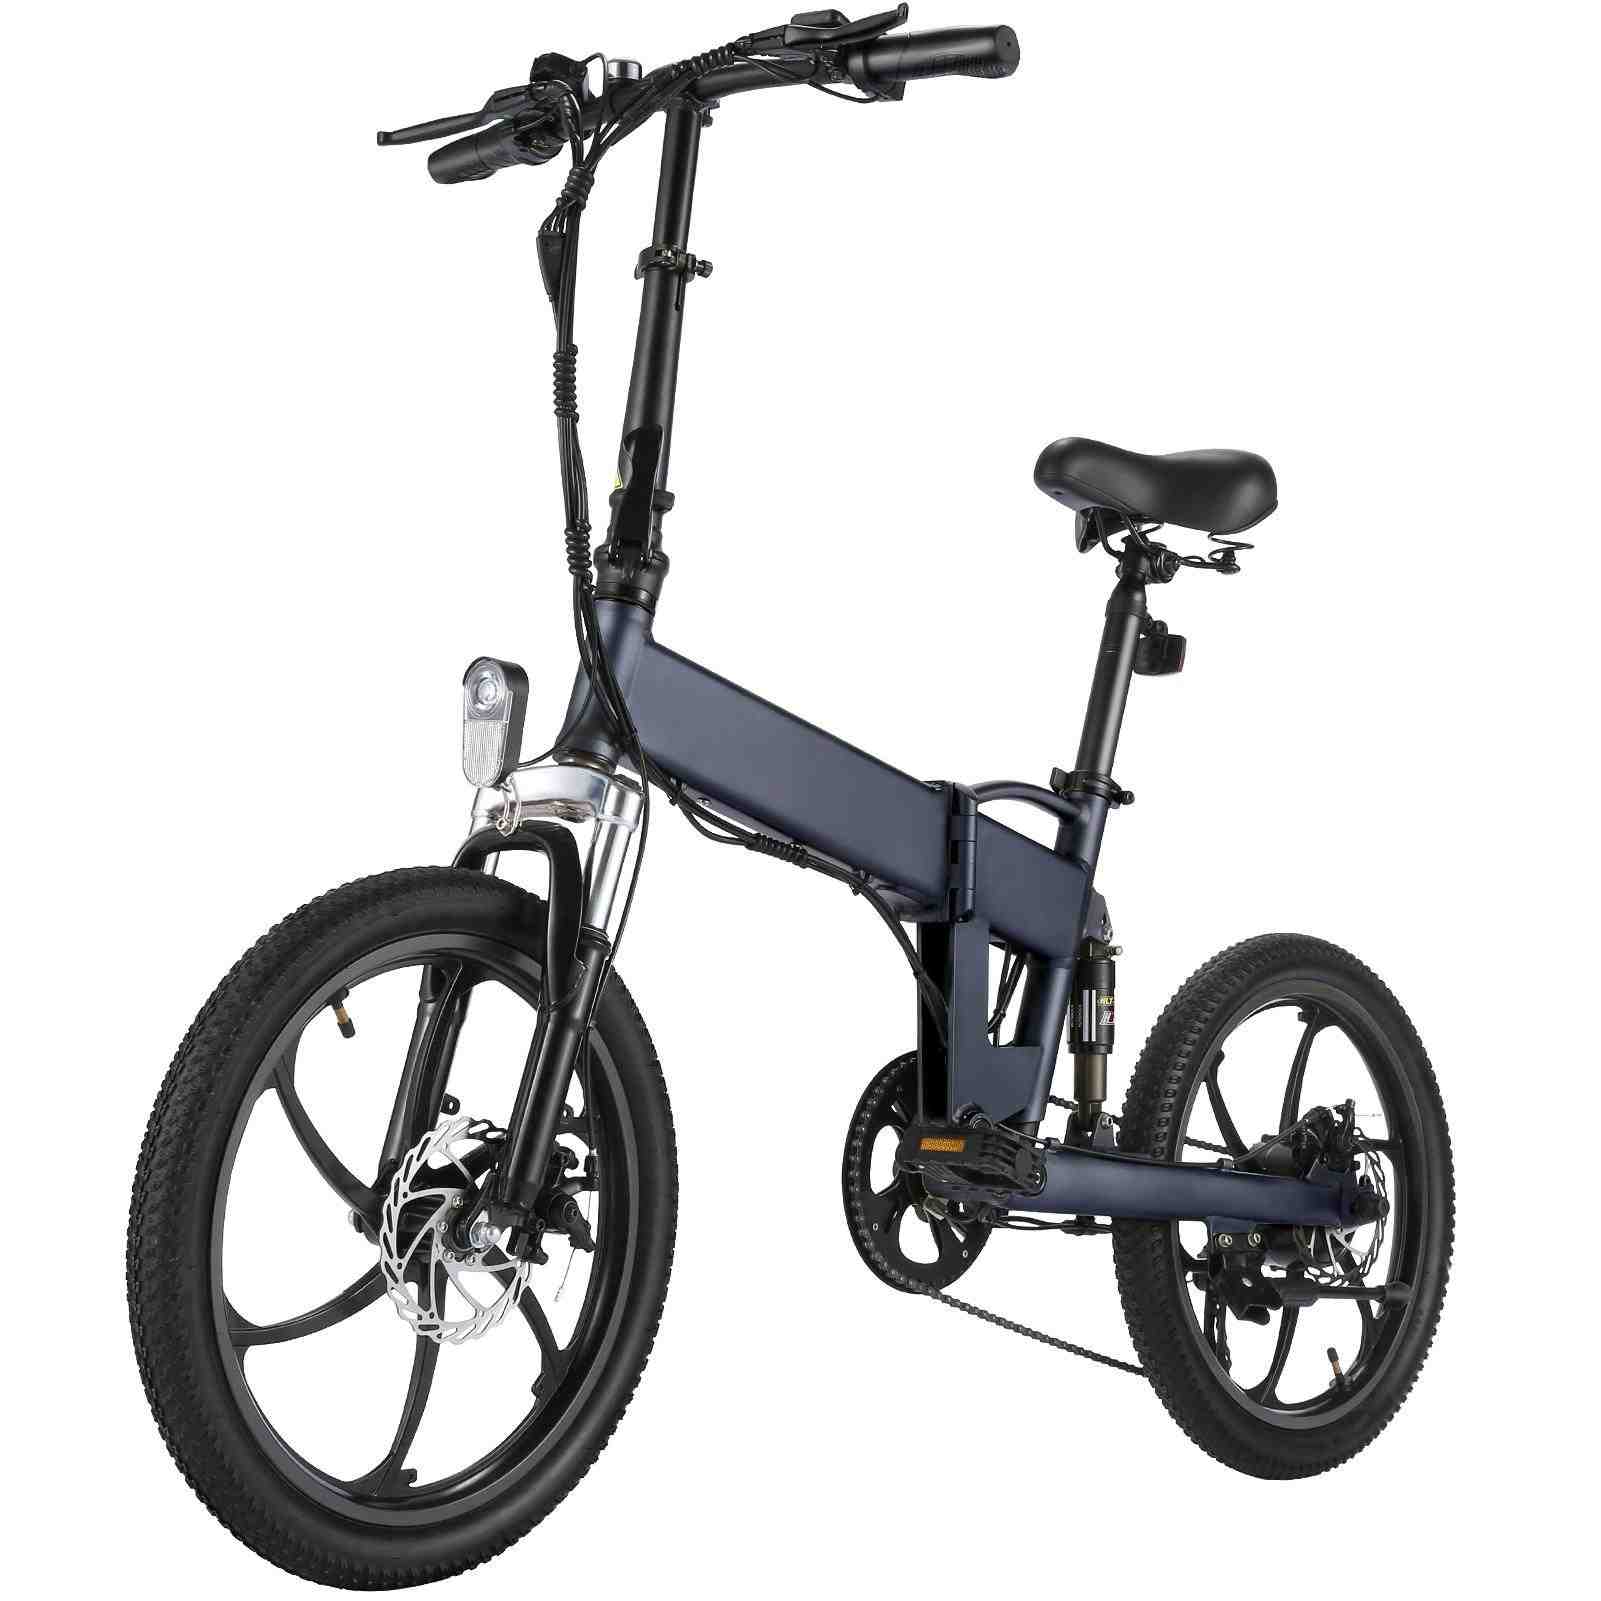 Do you still have to pedal an electric bike?